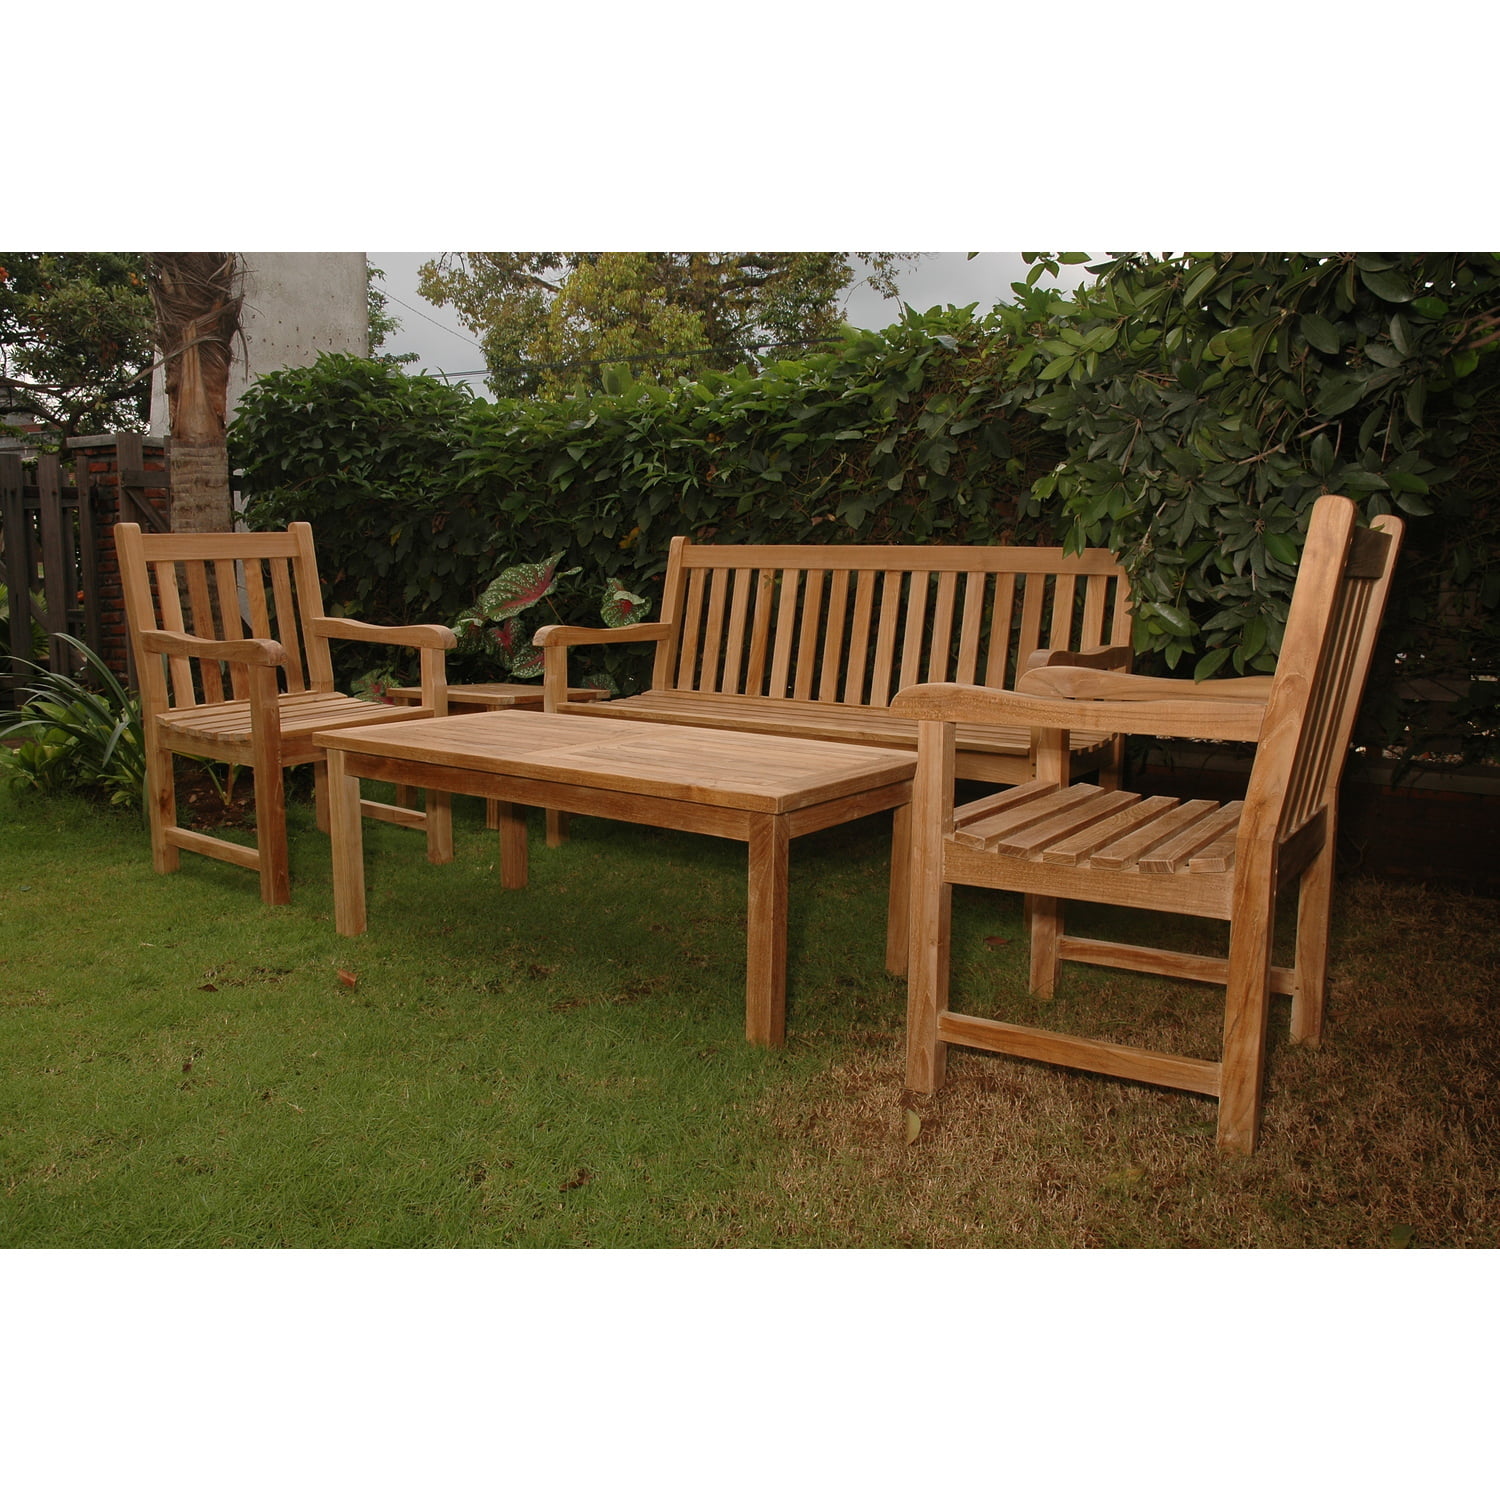 Picture of Anderson Teak Set-44 Clasic 3-Seater Bench